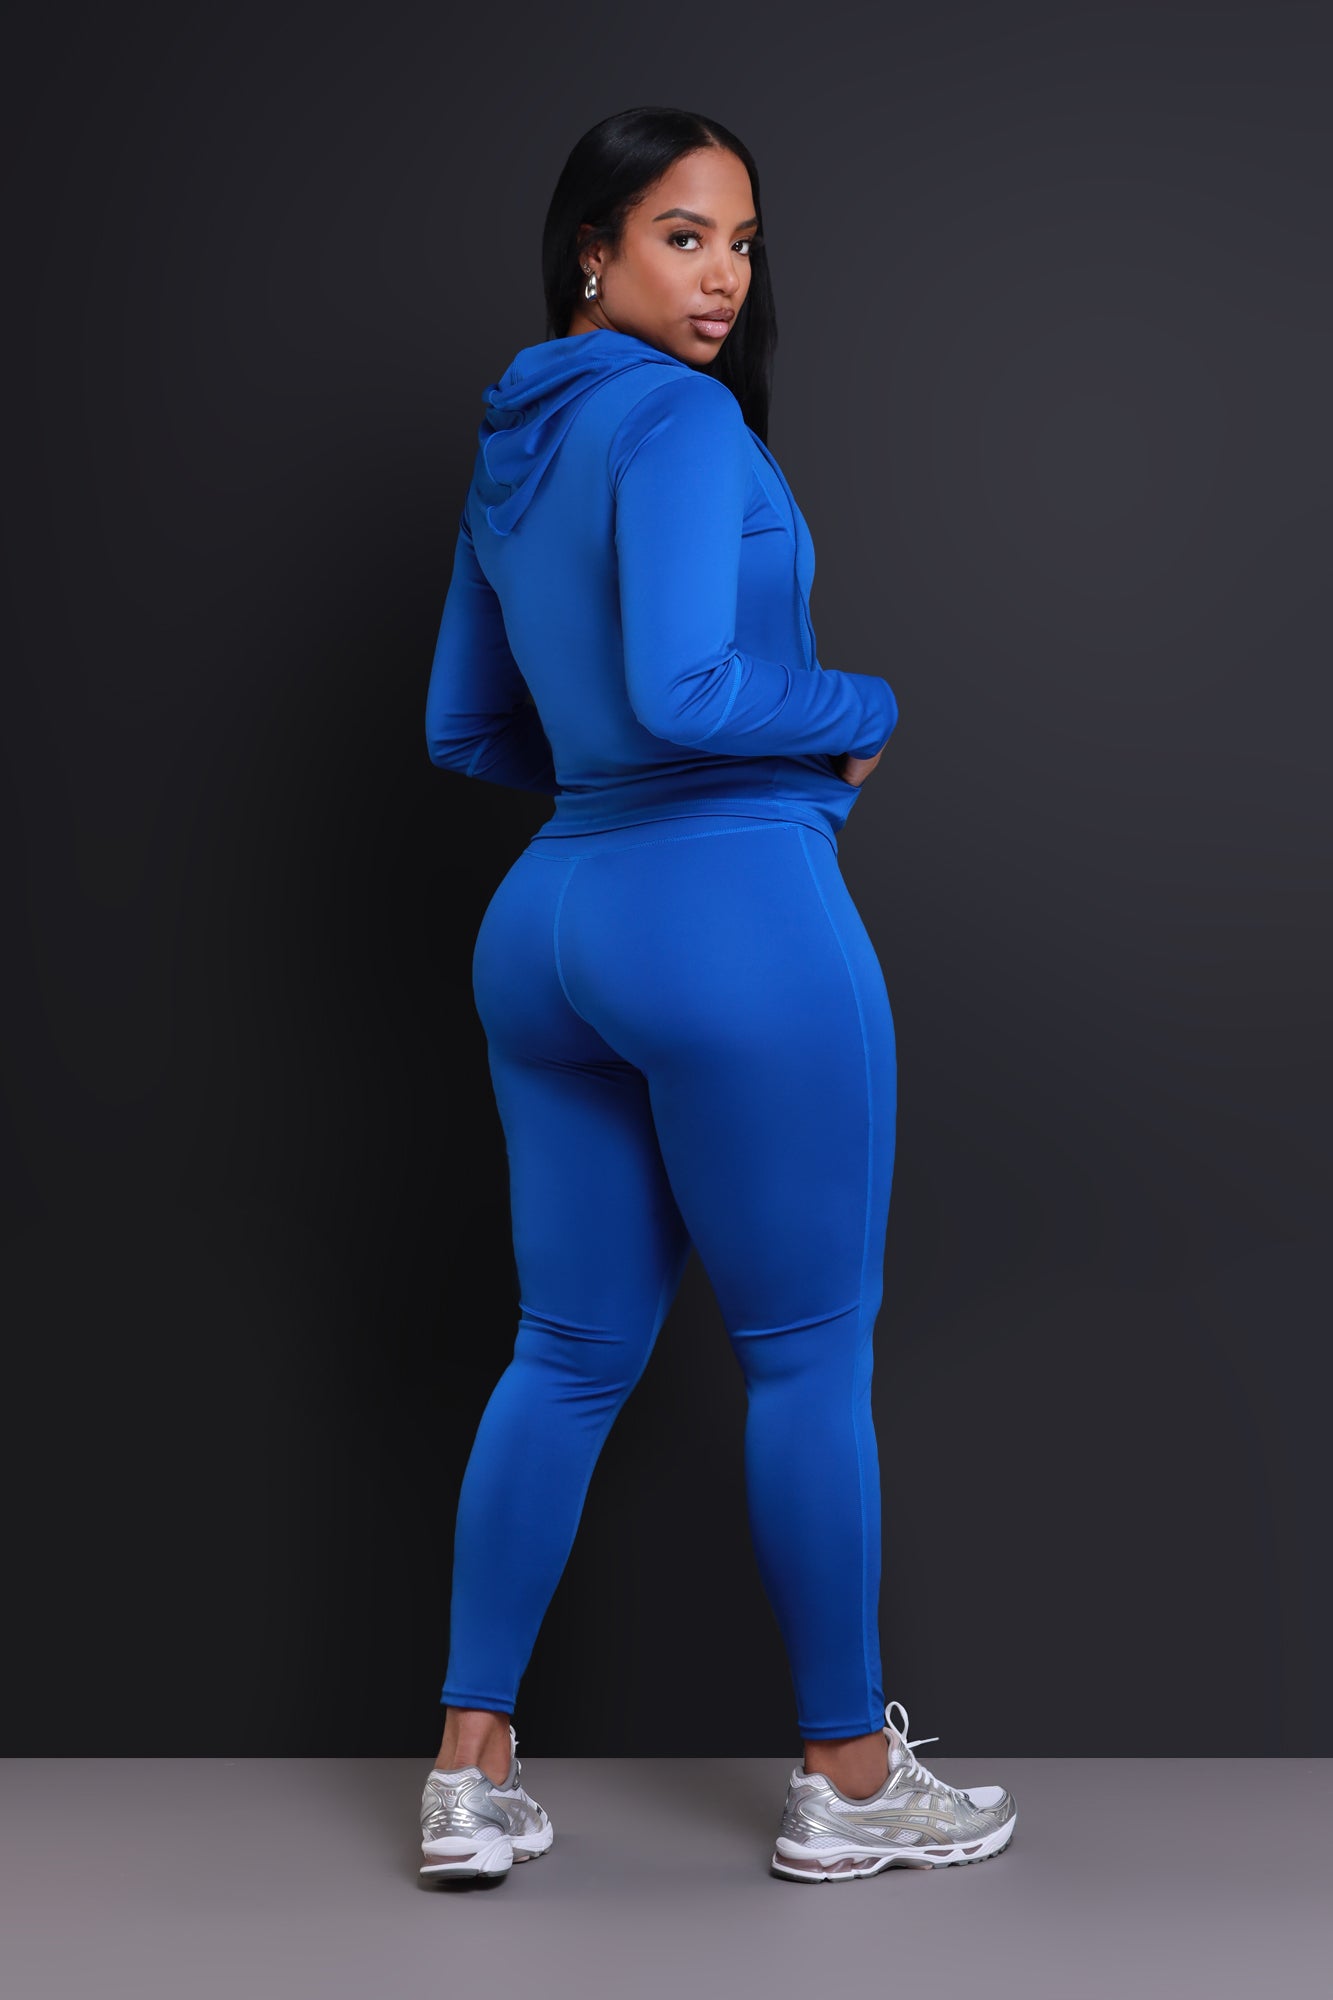 Spill The Tea Three Piece Cropped Athletic Set - Royal Blue - Swank A Posh